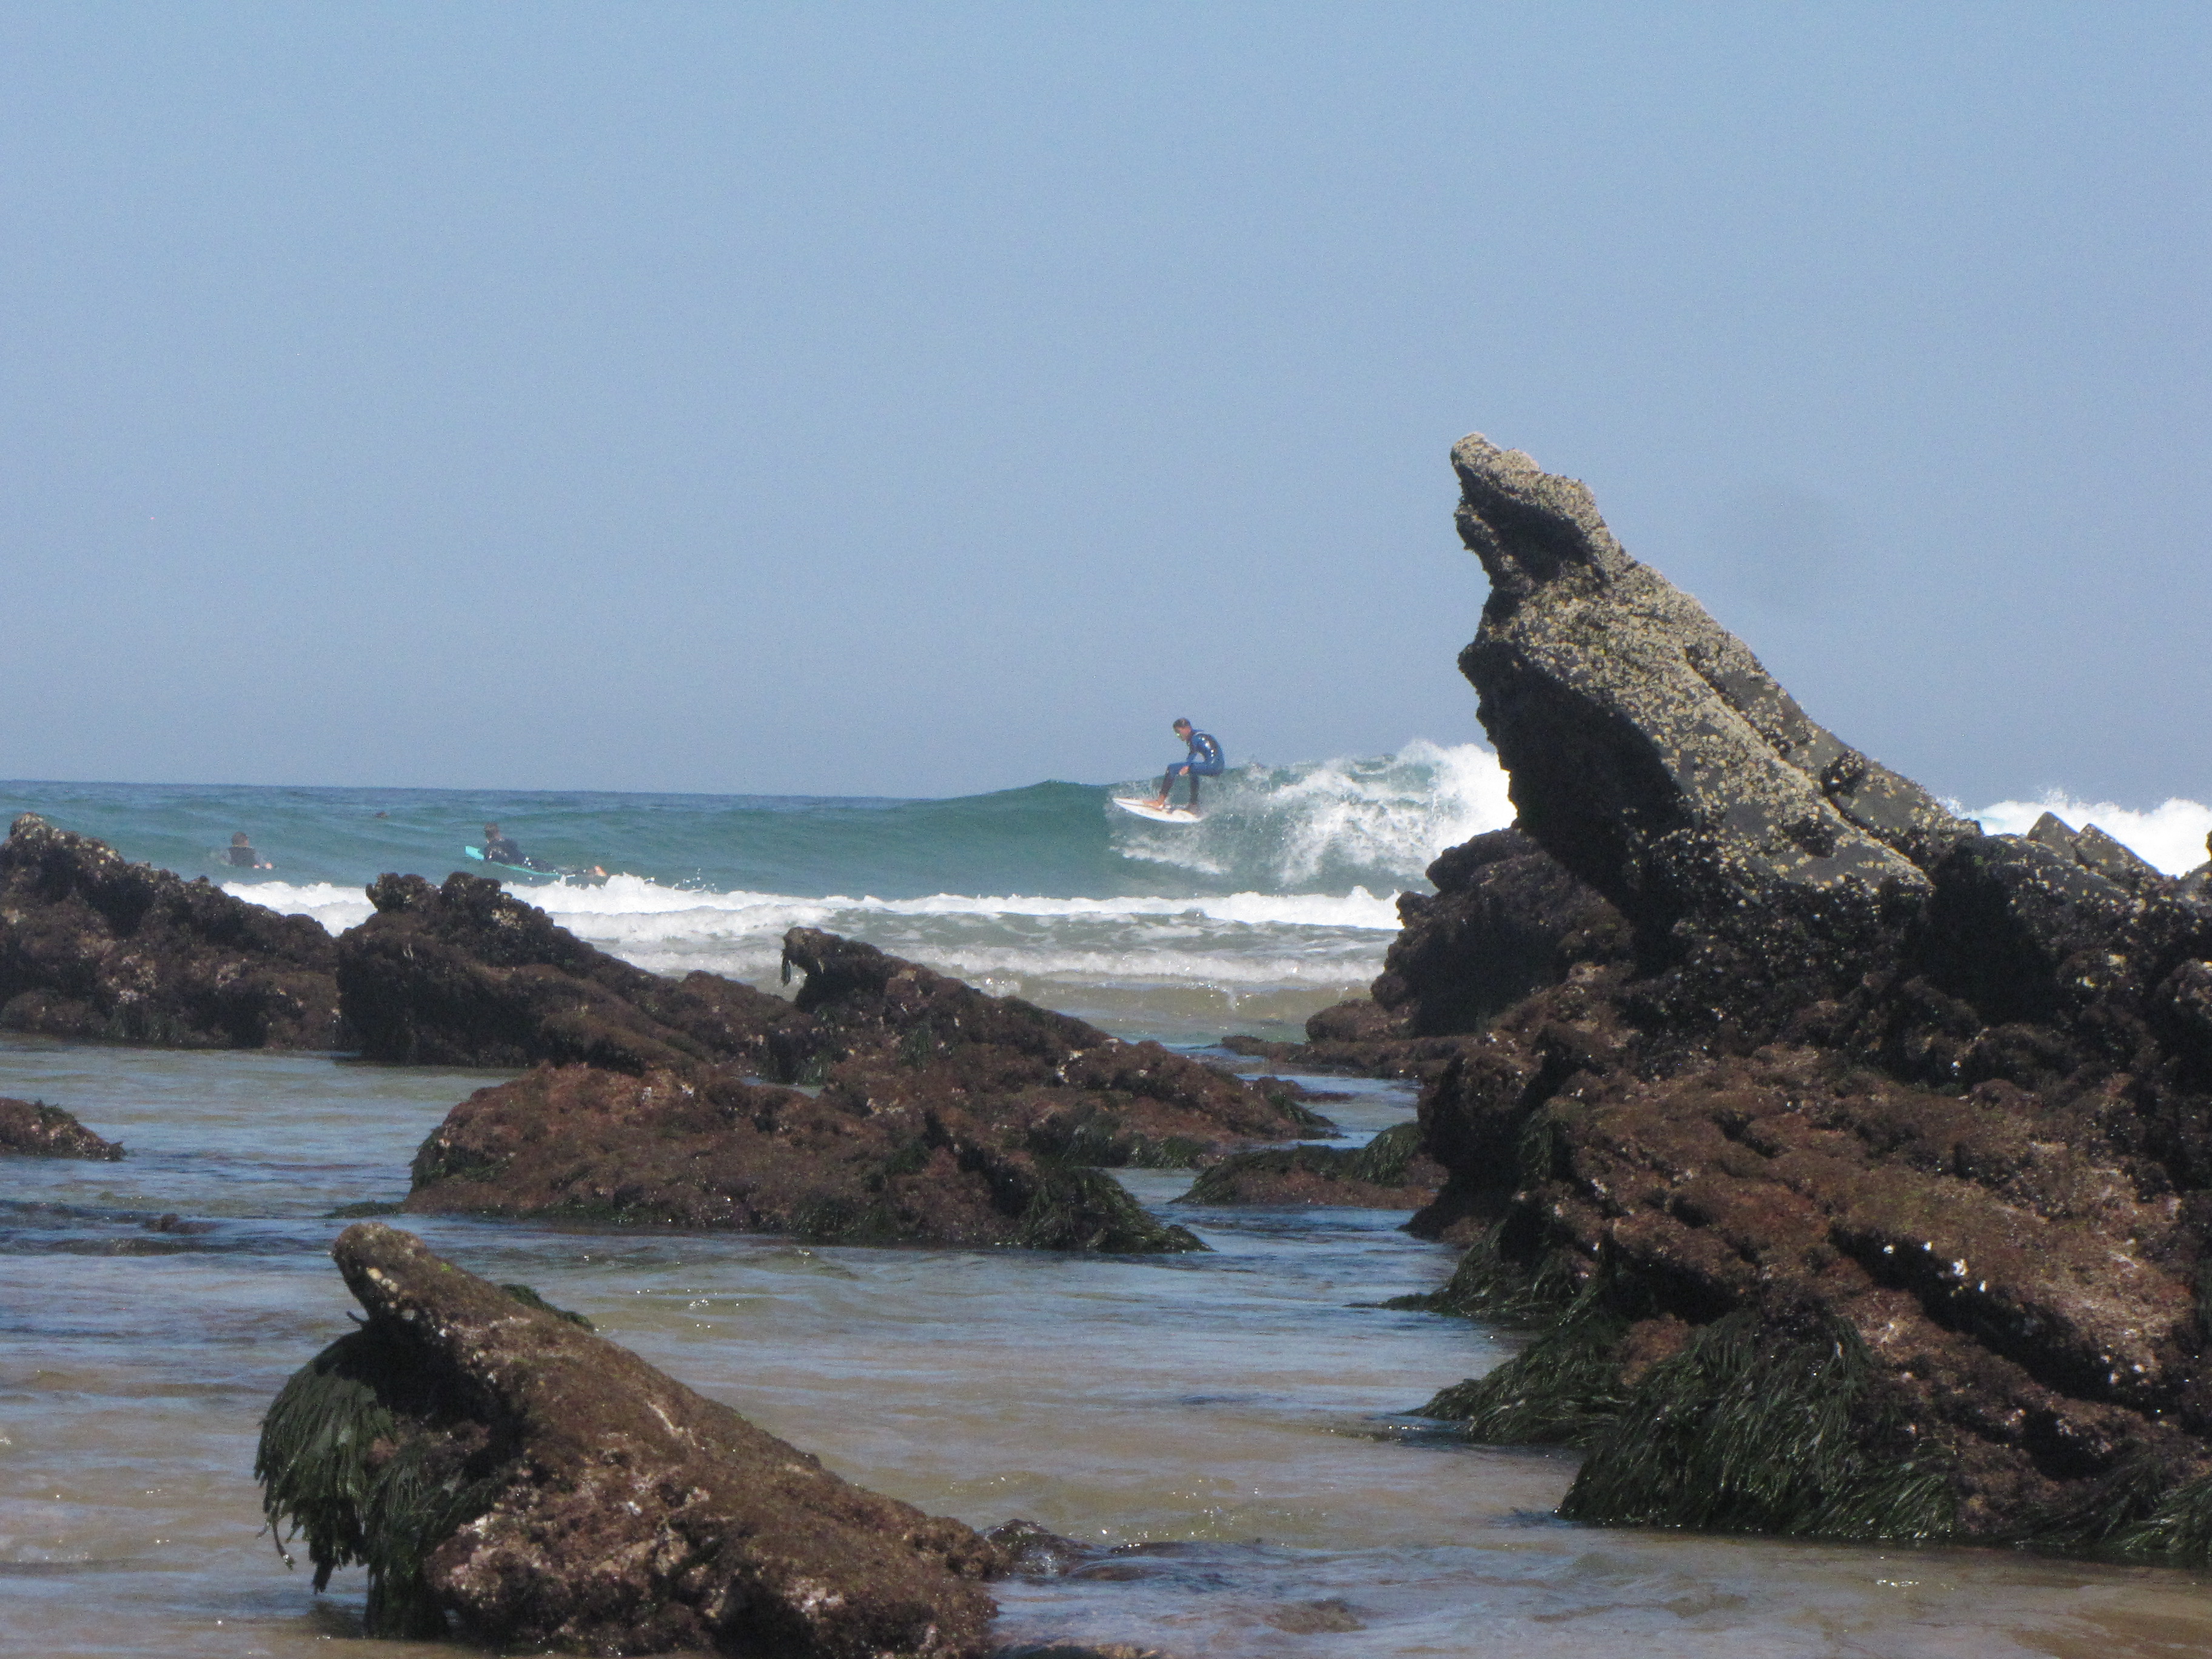 rocks and surfer on a nice blue wave in the algarve